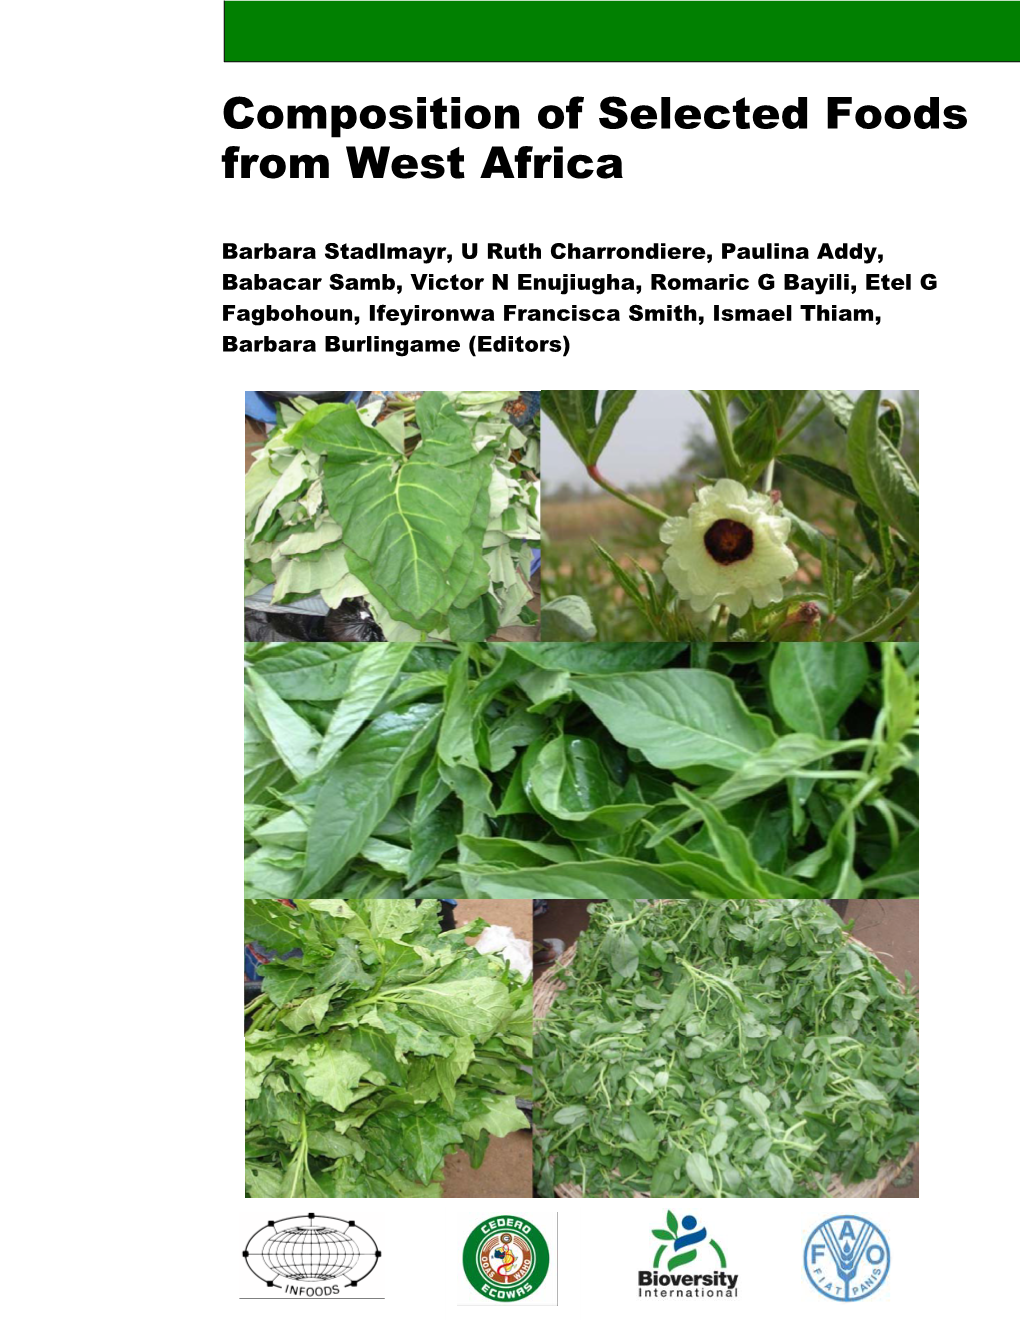 Composition of Selected Foods from West Africa